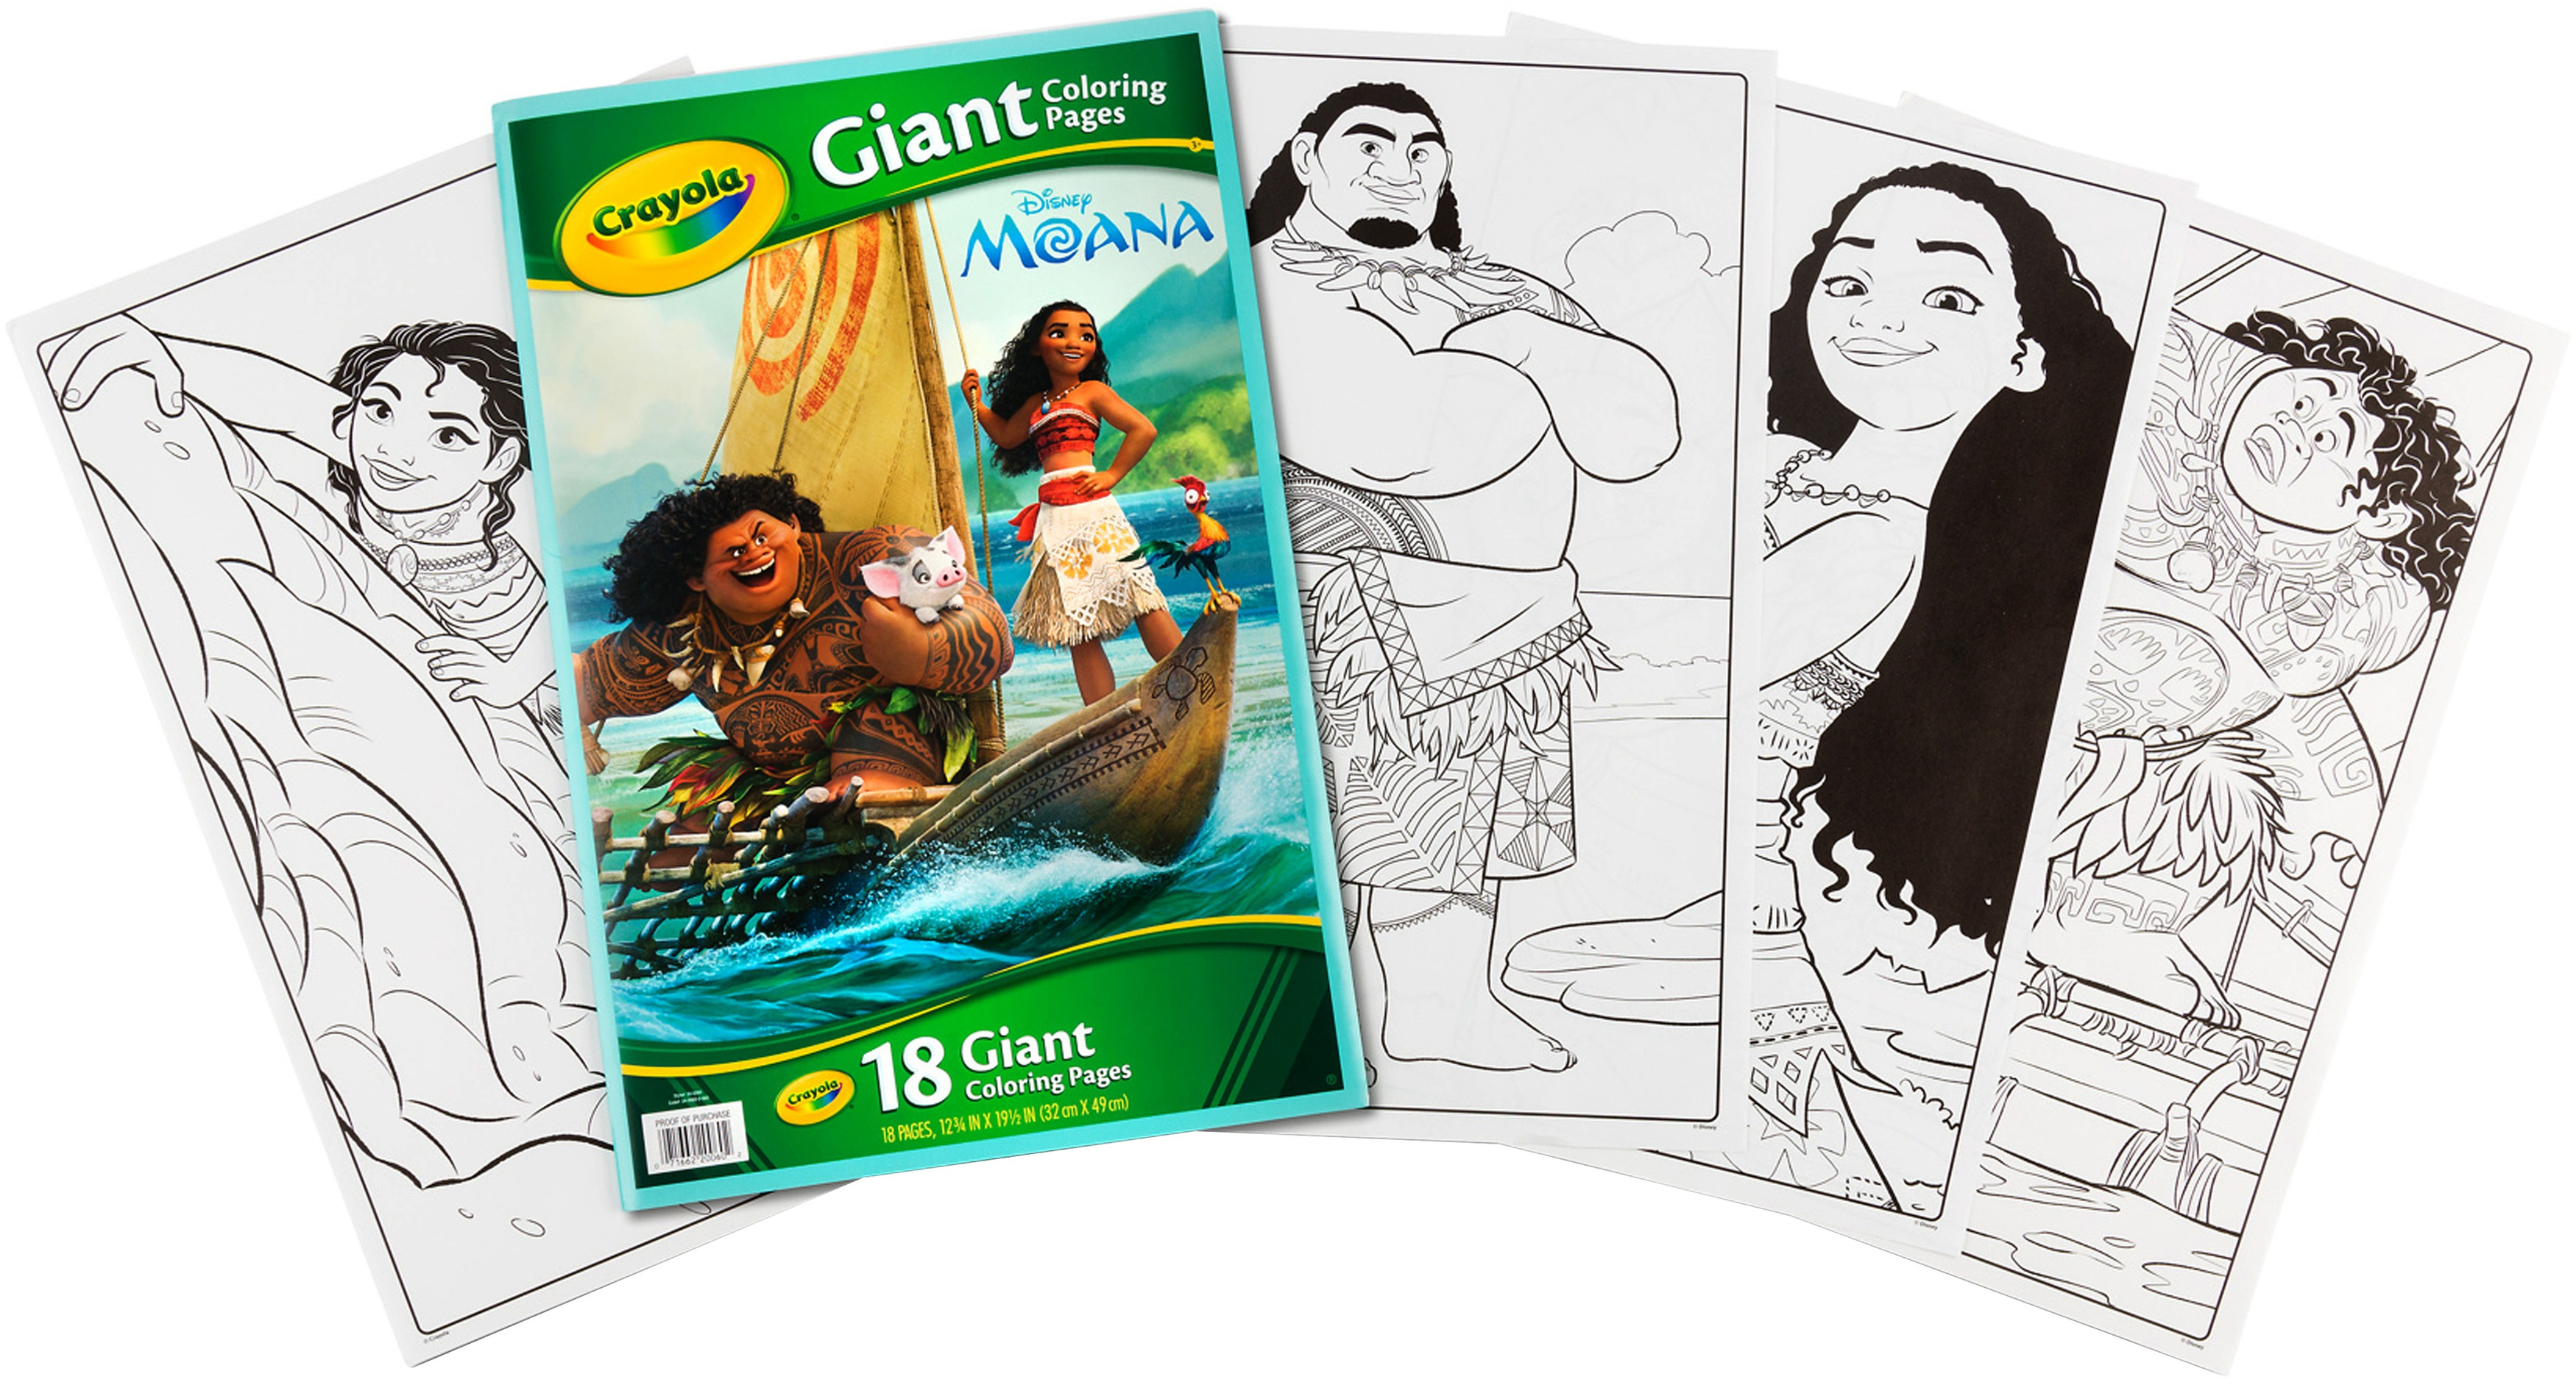 Giant Coloring Pages For Adults Crayola Giant Coloring Pages Featuring Disneys Moana